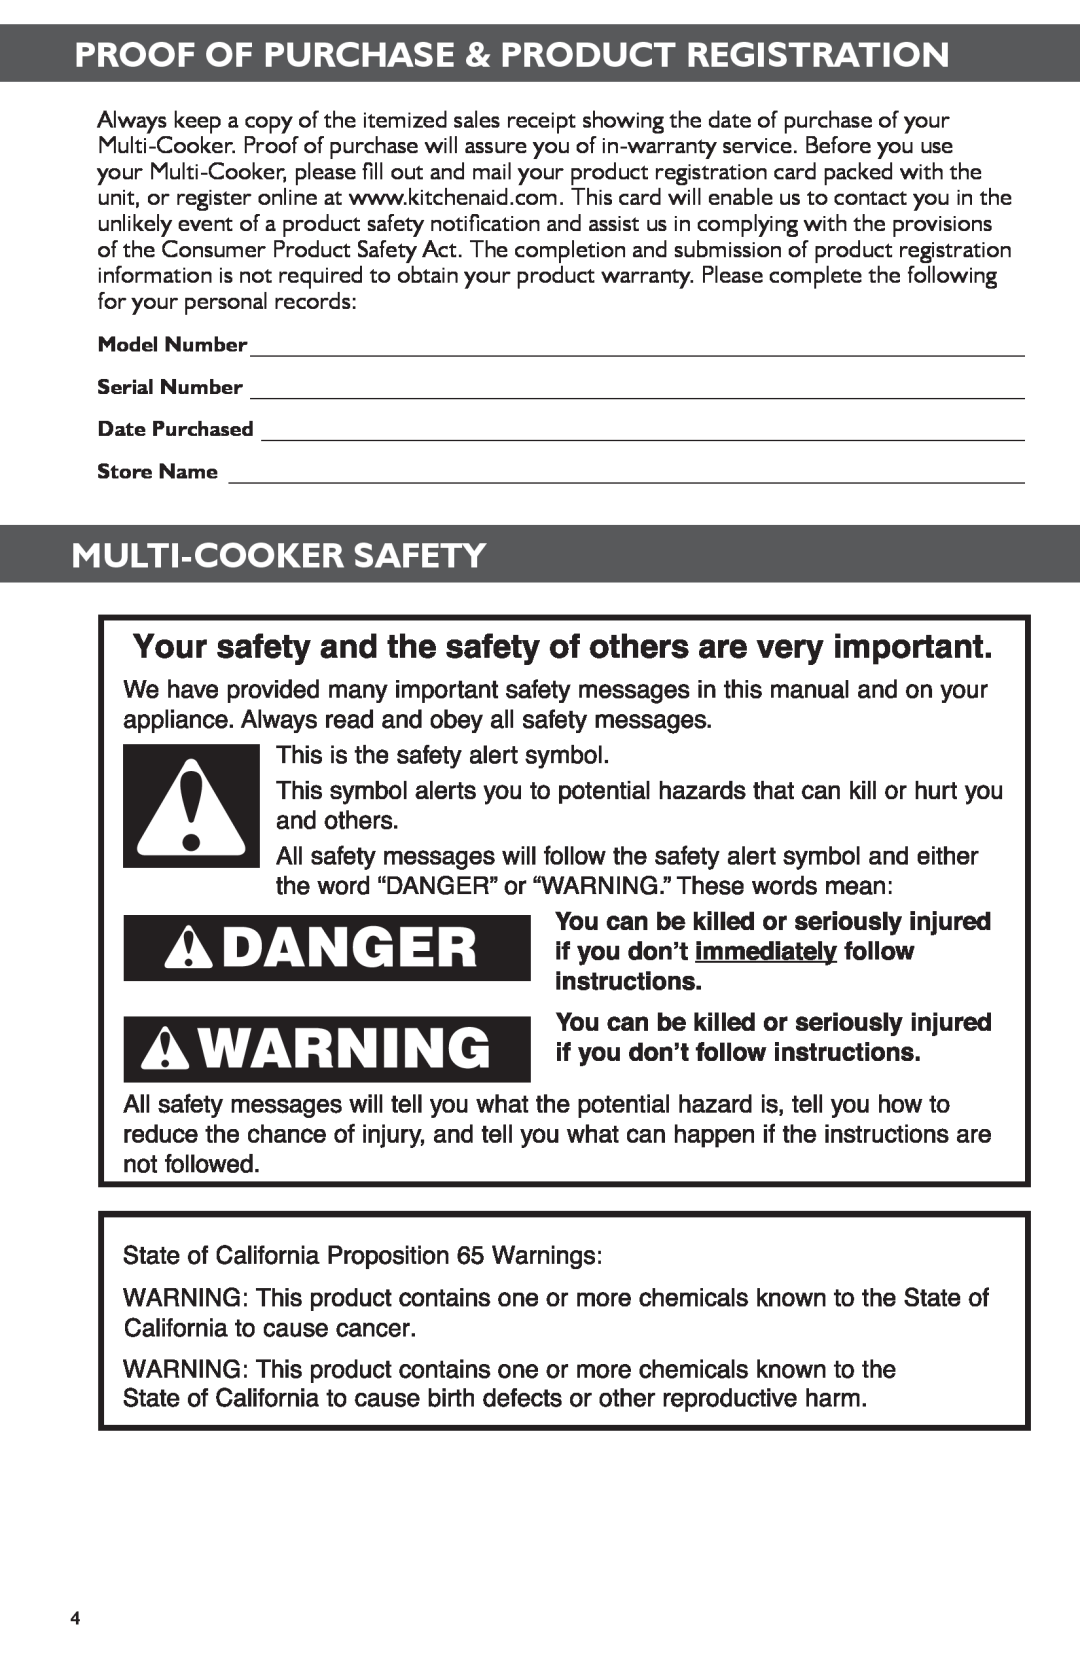 KitchenAid KMC4241 manual Proof Of Purchase & Product Registration, Multi-Cooker Safety 